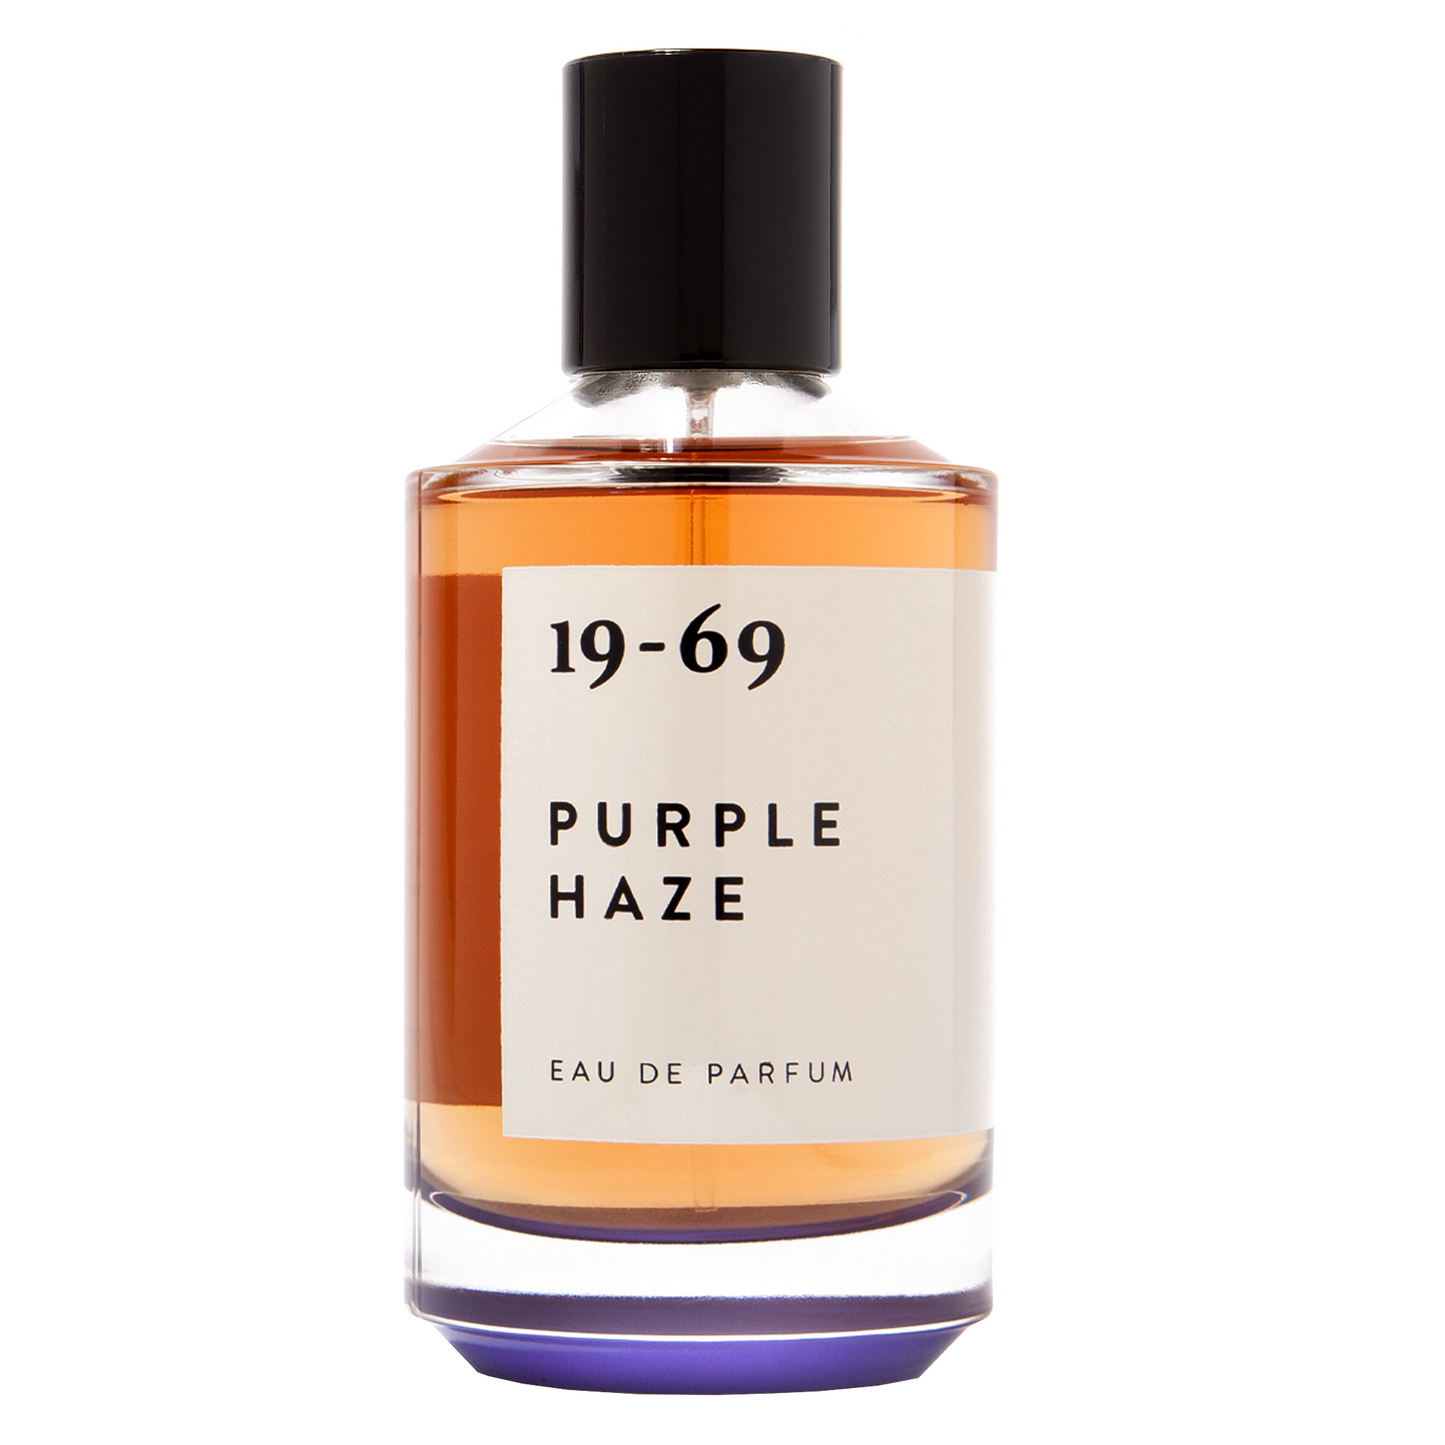 19-69 Purple Haze Perfume: Embracing the hippie movement and counterculture. Just like John and Yoko´s bed-ins in Amsterdam and Montreal, as well as the Woodstock Music and Art Fair (1969). Purple Haze sets the ambience for 19-69.  Purple Haze by 19-69 is deep, powerful, quirky and captivating. Fragrance notes include Cannabis Accord, Violet Leaf and Patchouli. All 19-69 perfumes are suitable for any gender.